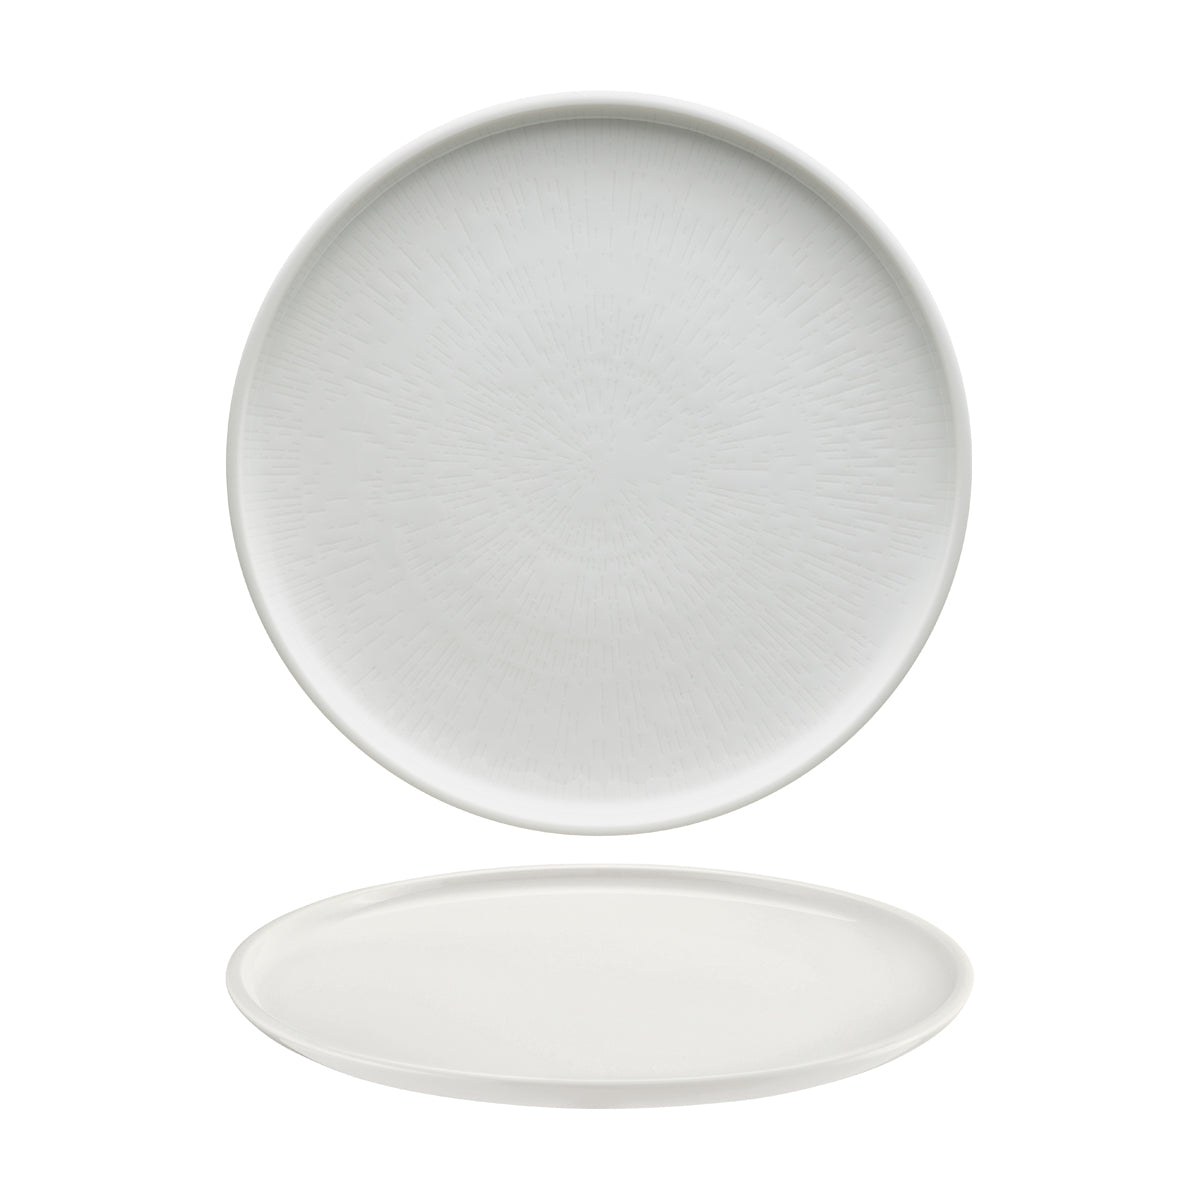 SH9251278 Schonwald Shiro Round Flat Coupe Plate Relief Design 280mm Tomkin Australia Hospitality Supplies